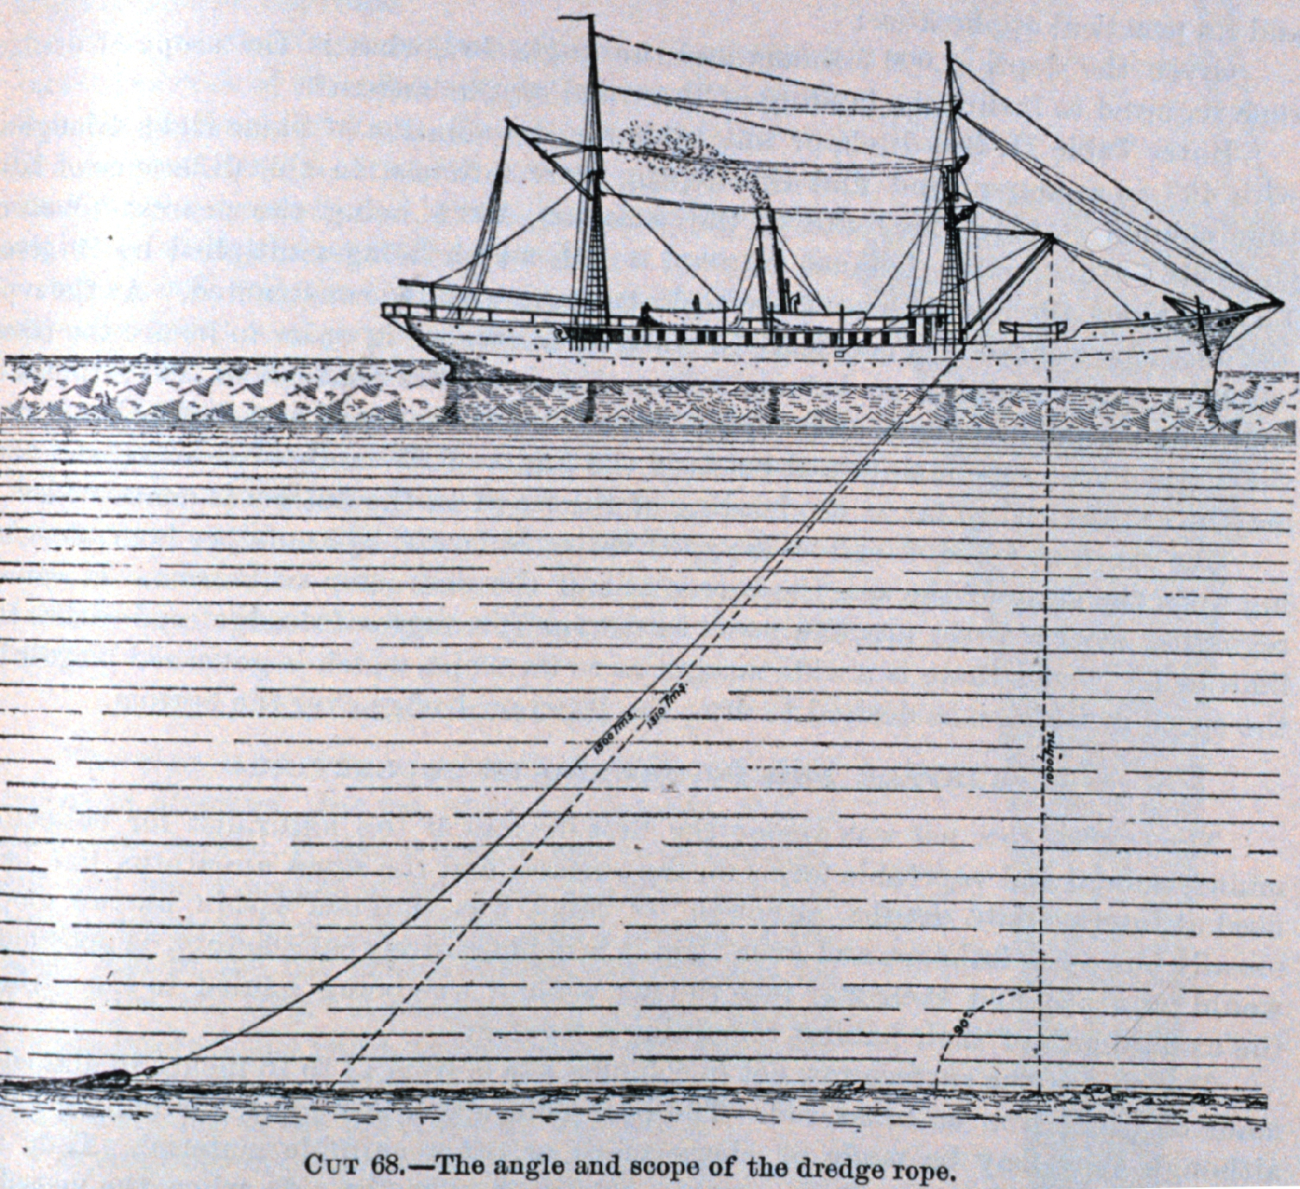 Diagram depicting depth of water as related to angle and scope of dredge ropefor operations conducted off the United States Fish Commission Steamer ALBATROSS